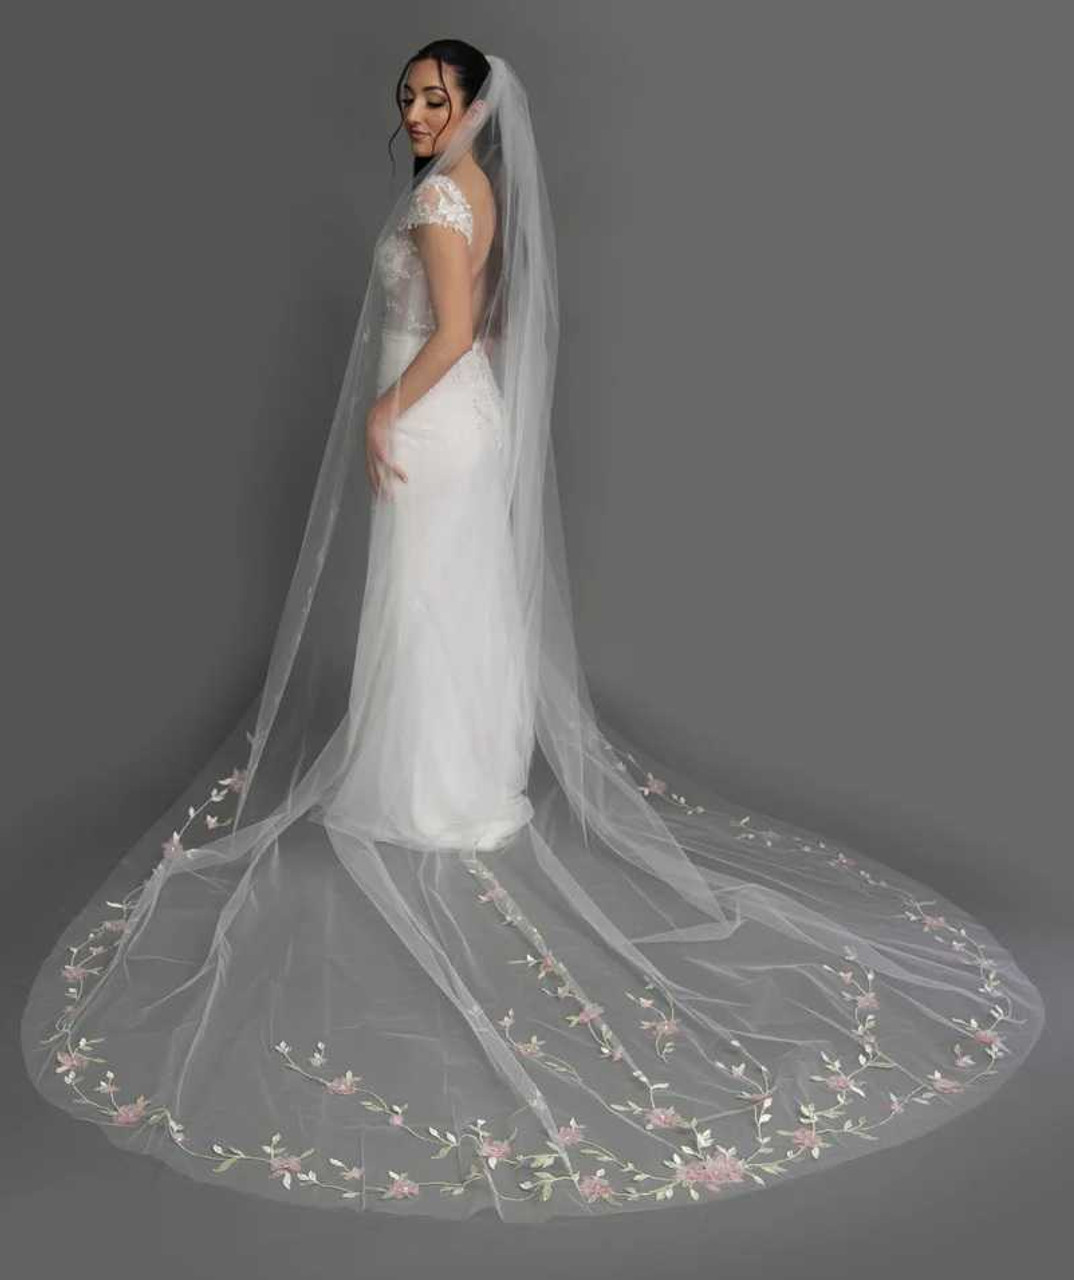 https://cdn11.bigcommerce.com/s-zb3qt33o/images/stencil/1280x1280/products/19880/61285/Royal-Cathedral-Wedding-Veil-with-Multi-Color-Embroidery-Elena-E1385_61218__82444.1690395644.jpg?c=2